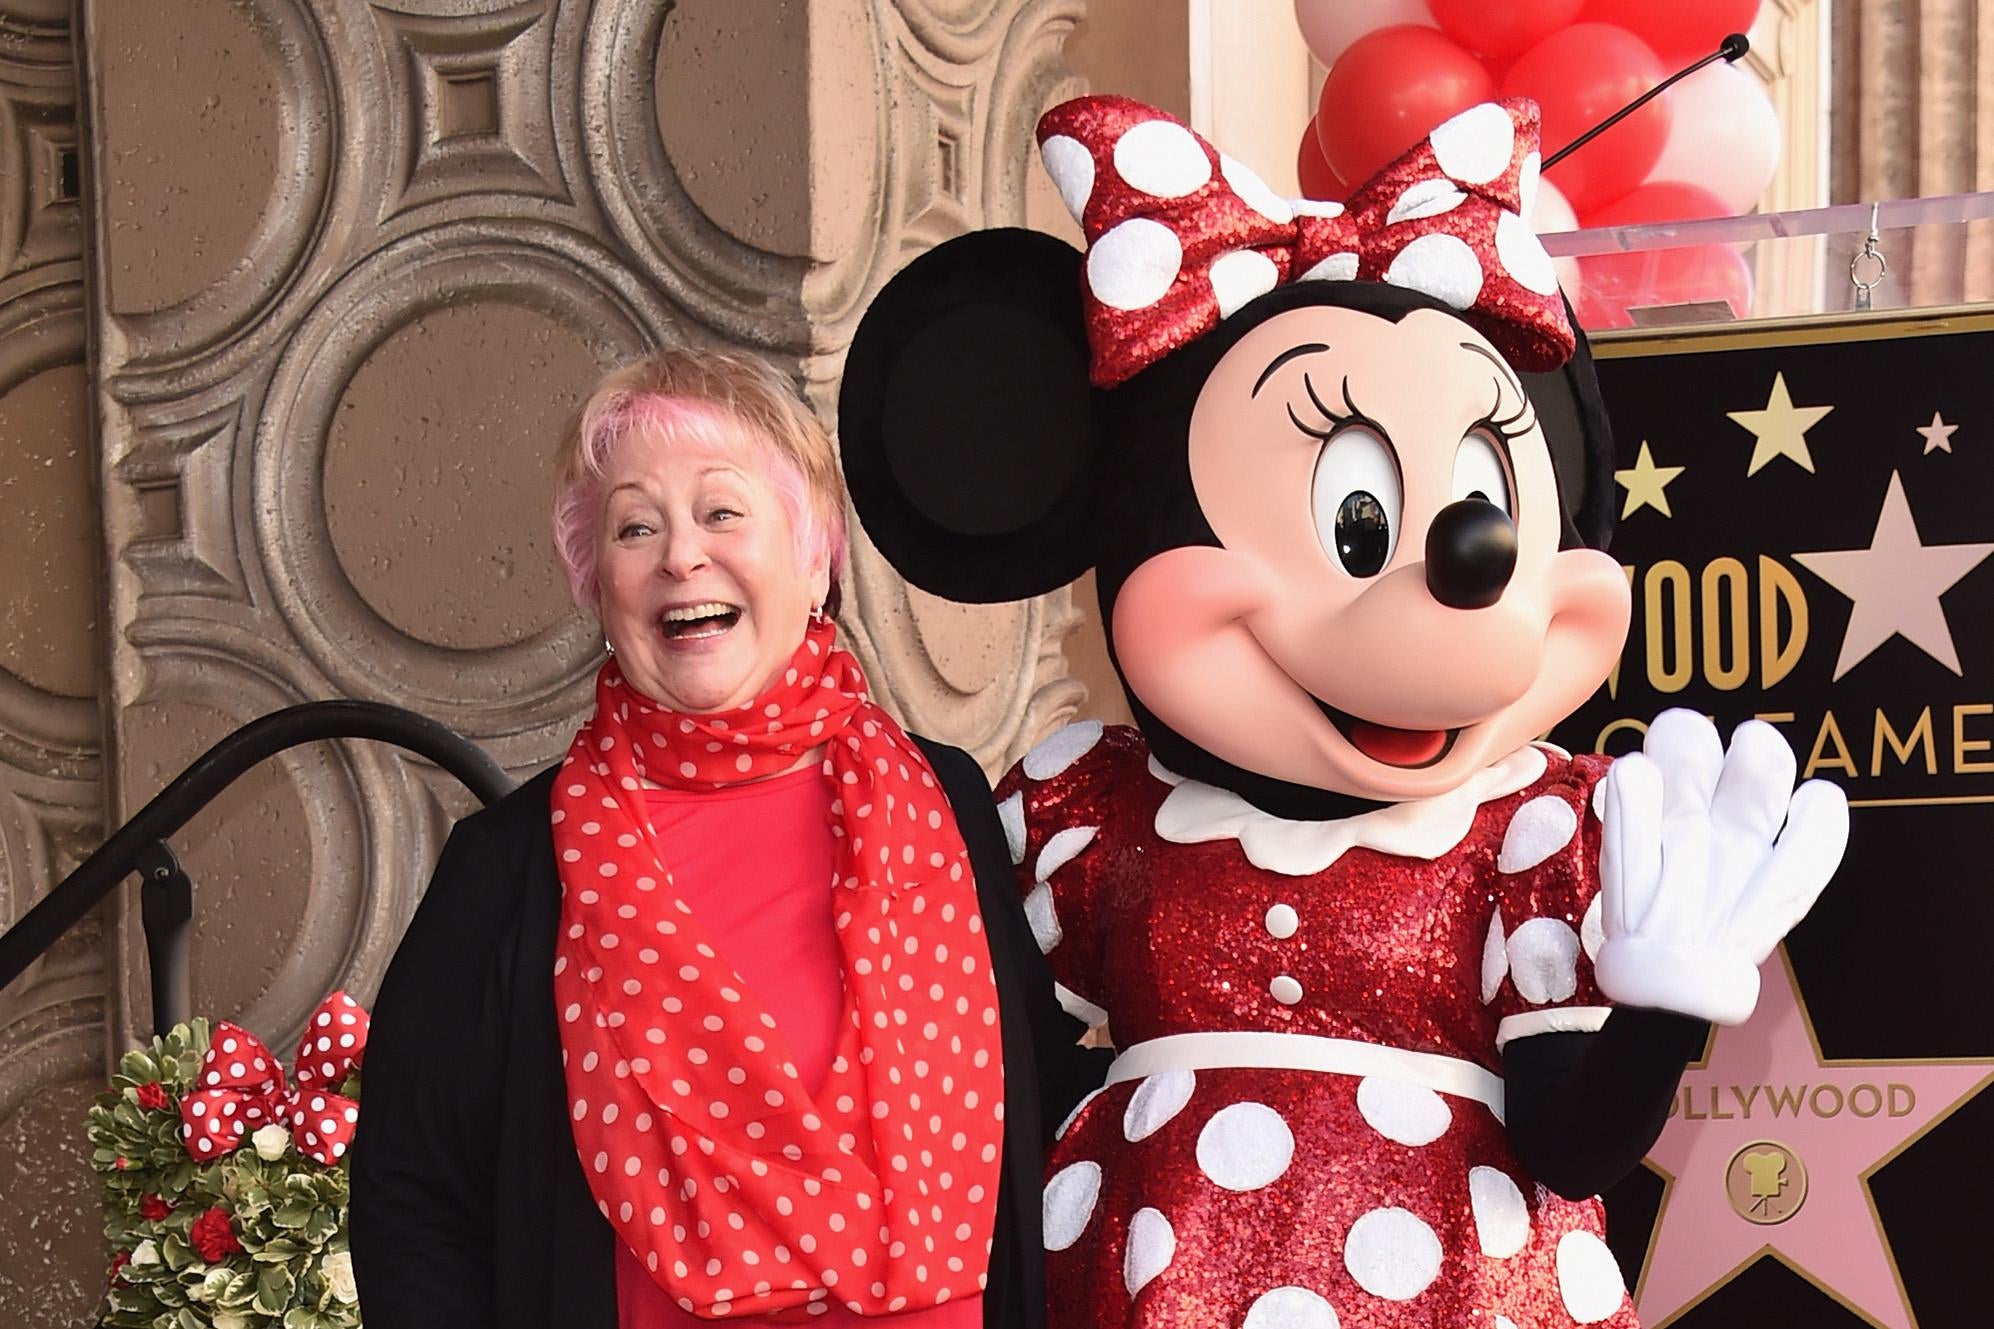 Russi Taylor, who has voiced Minnie Mouse since 1986, poses with Minnie Mouse at a Hollywood Boulevard star ceremony.